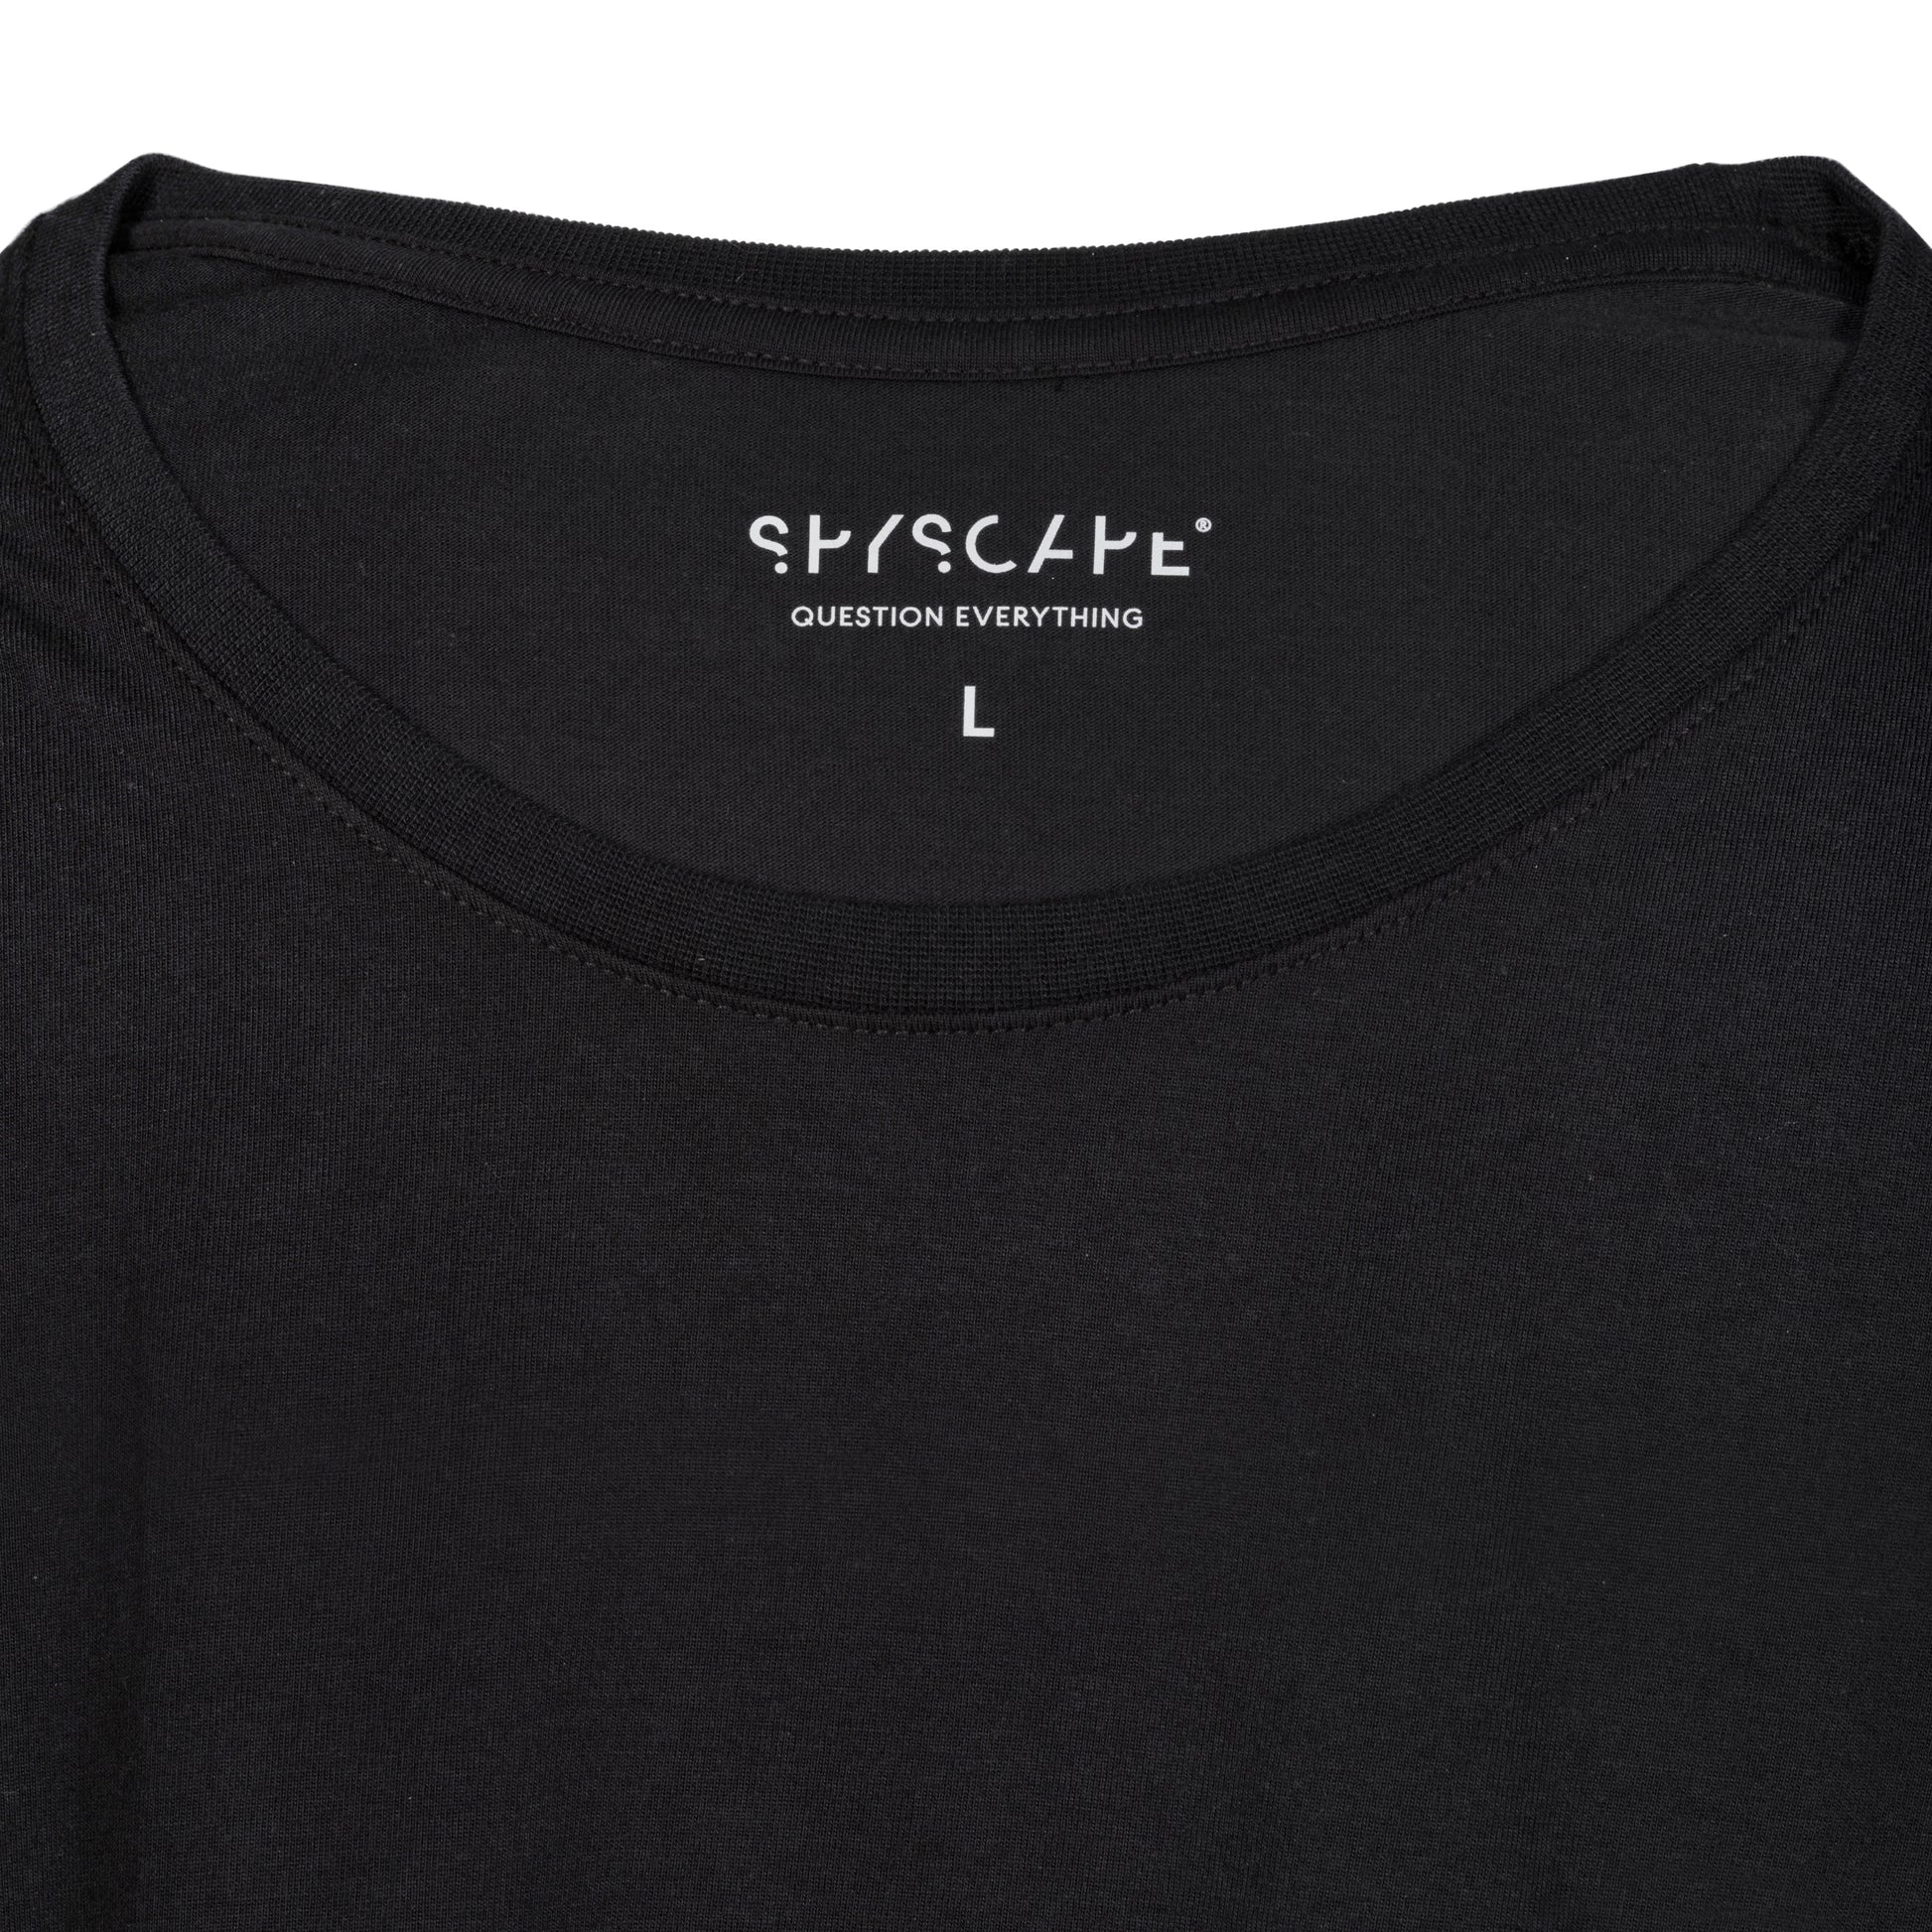 SPYSCAPE Cryptologist T-Shirt with Hidden Zip Pocket - inner neck print with SPYSCAPE and Question Everything and size printed